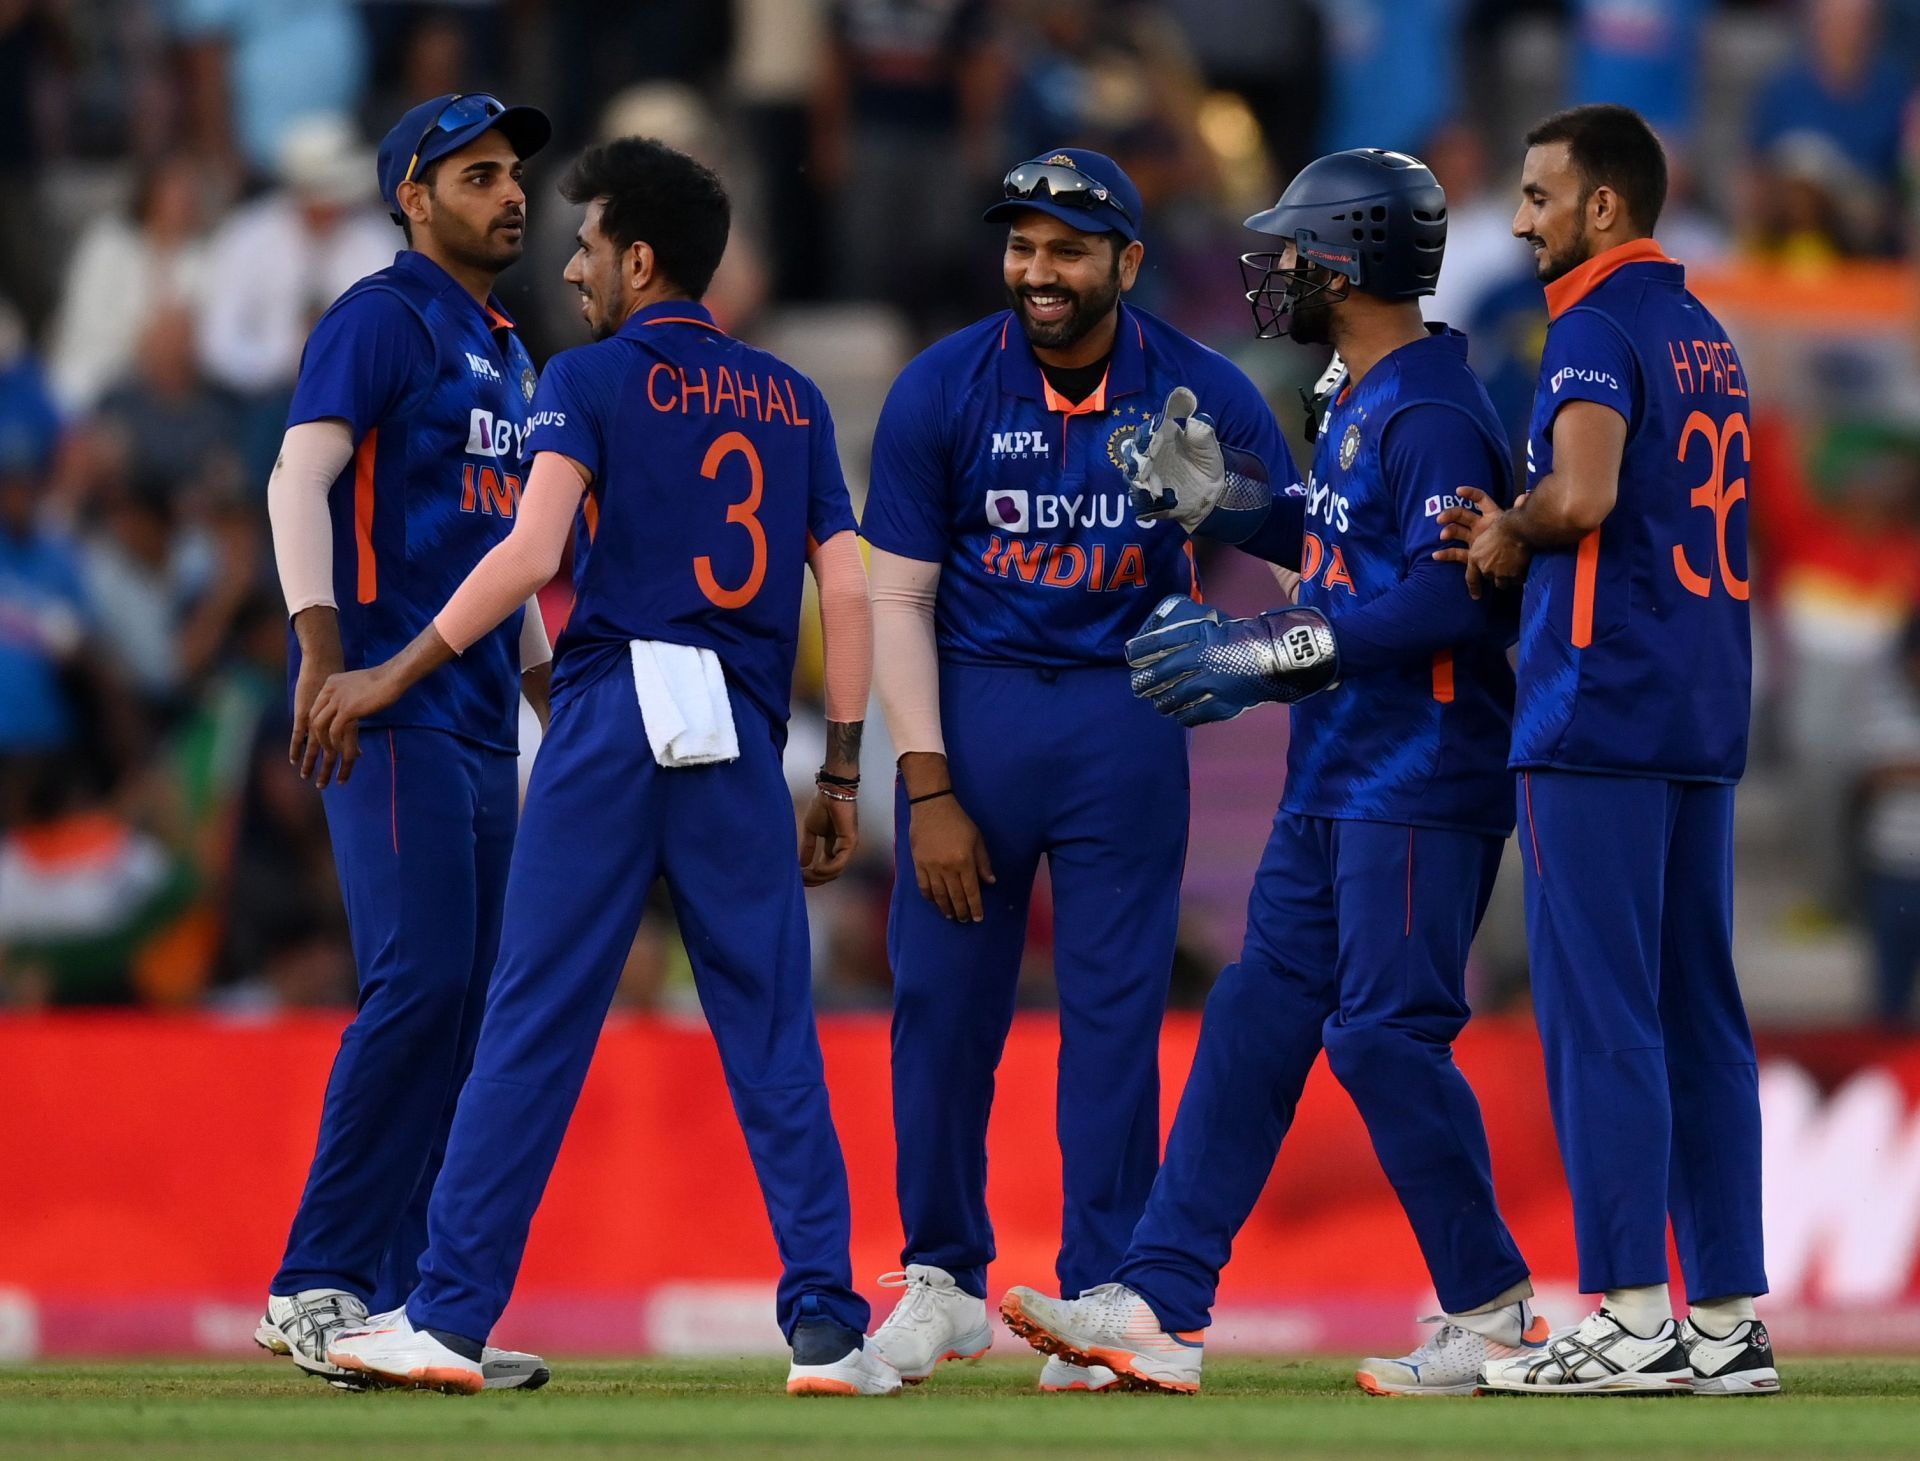 Rohit Sharma celebrates a wicket with teammates in England. Pic: Getty Images